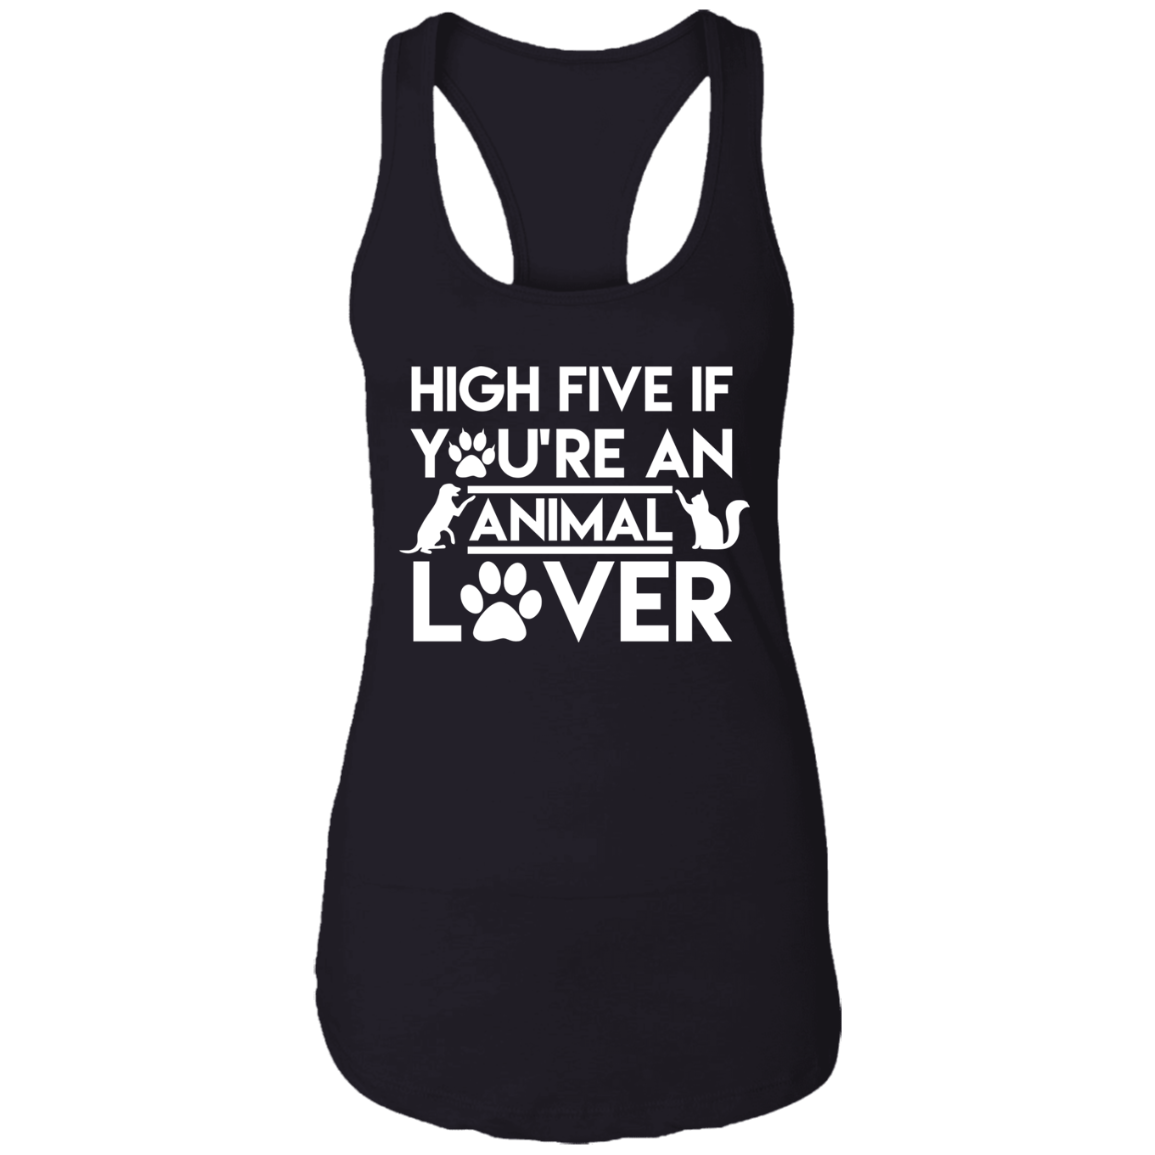 High Five If You're An Animal Lover - Ladies Racer Back Tank.